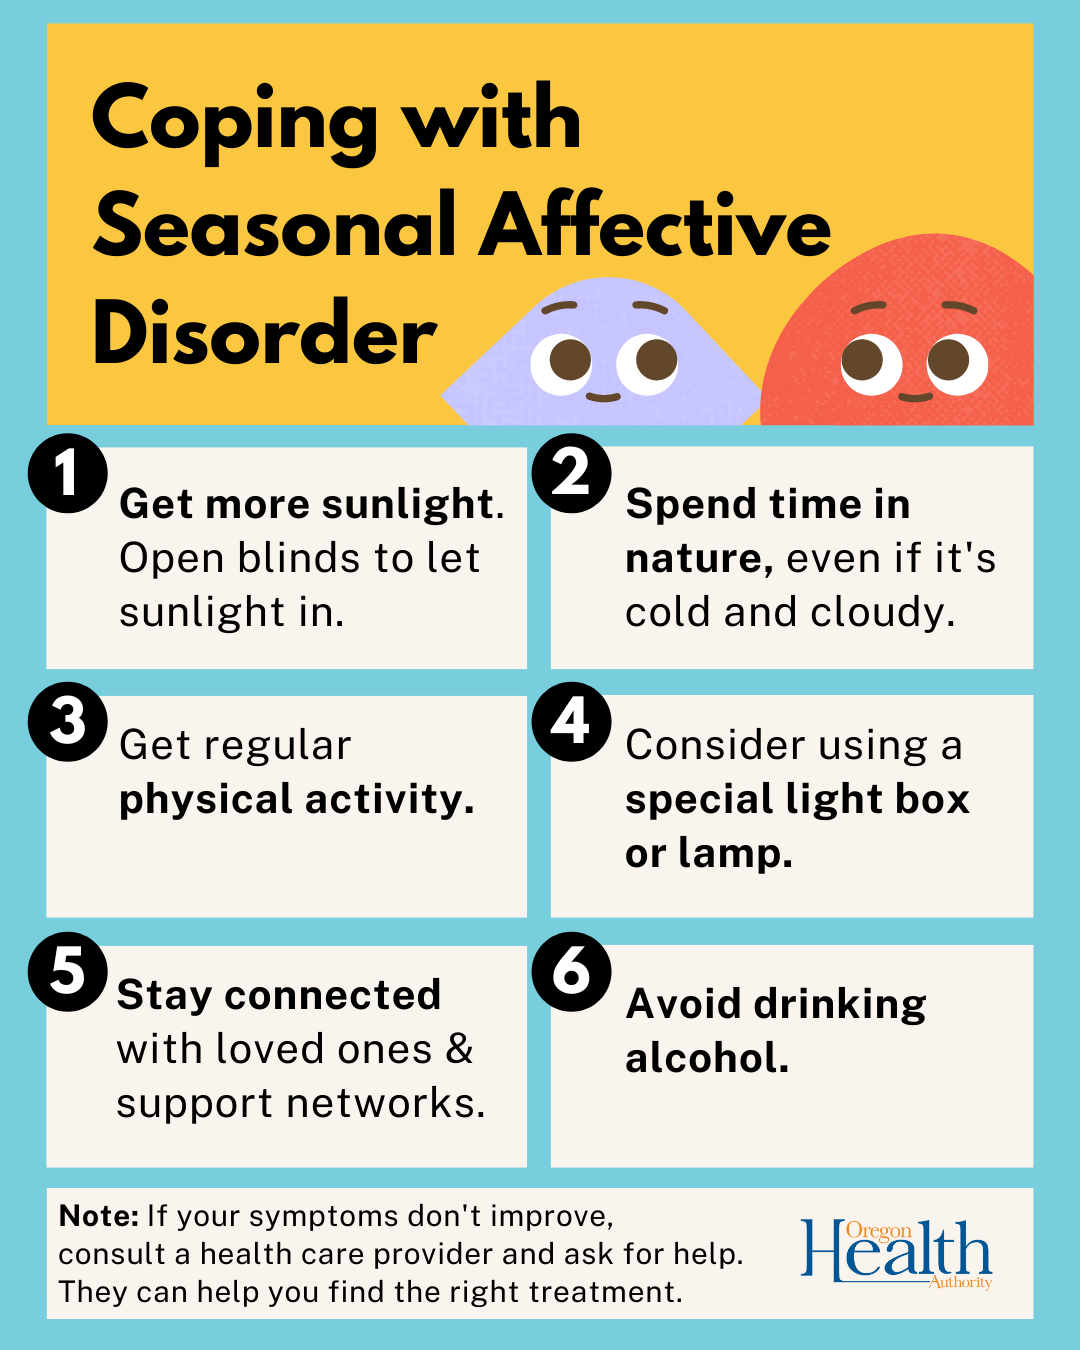 six tips for coping with seasonal affective disorder: sunlight, physical activity, time in nature, stay connected, avoid alcohol, special light box. 